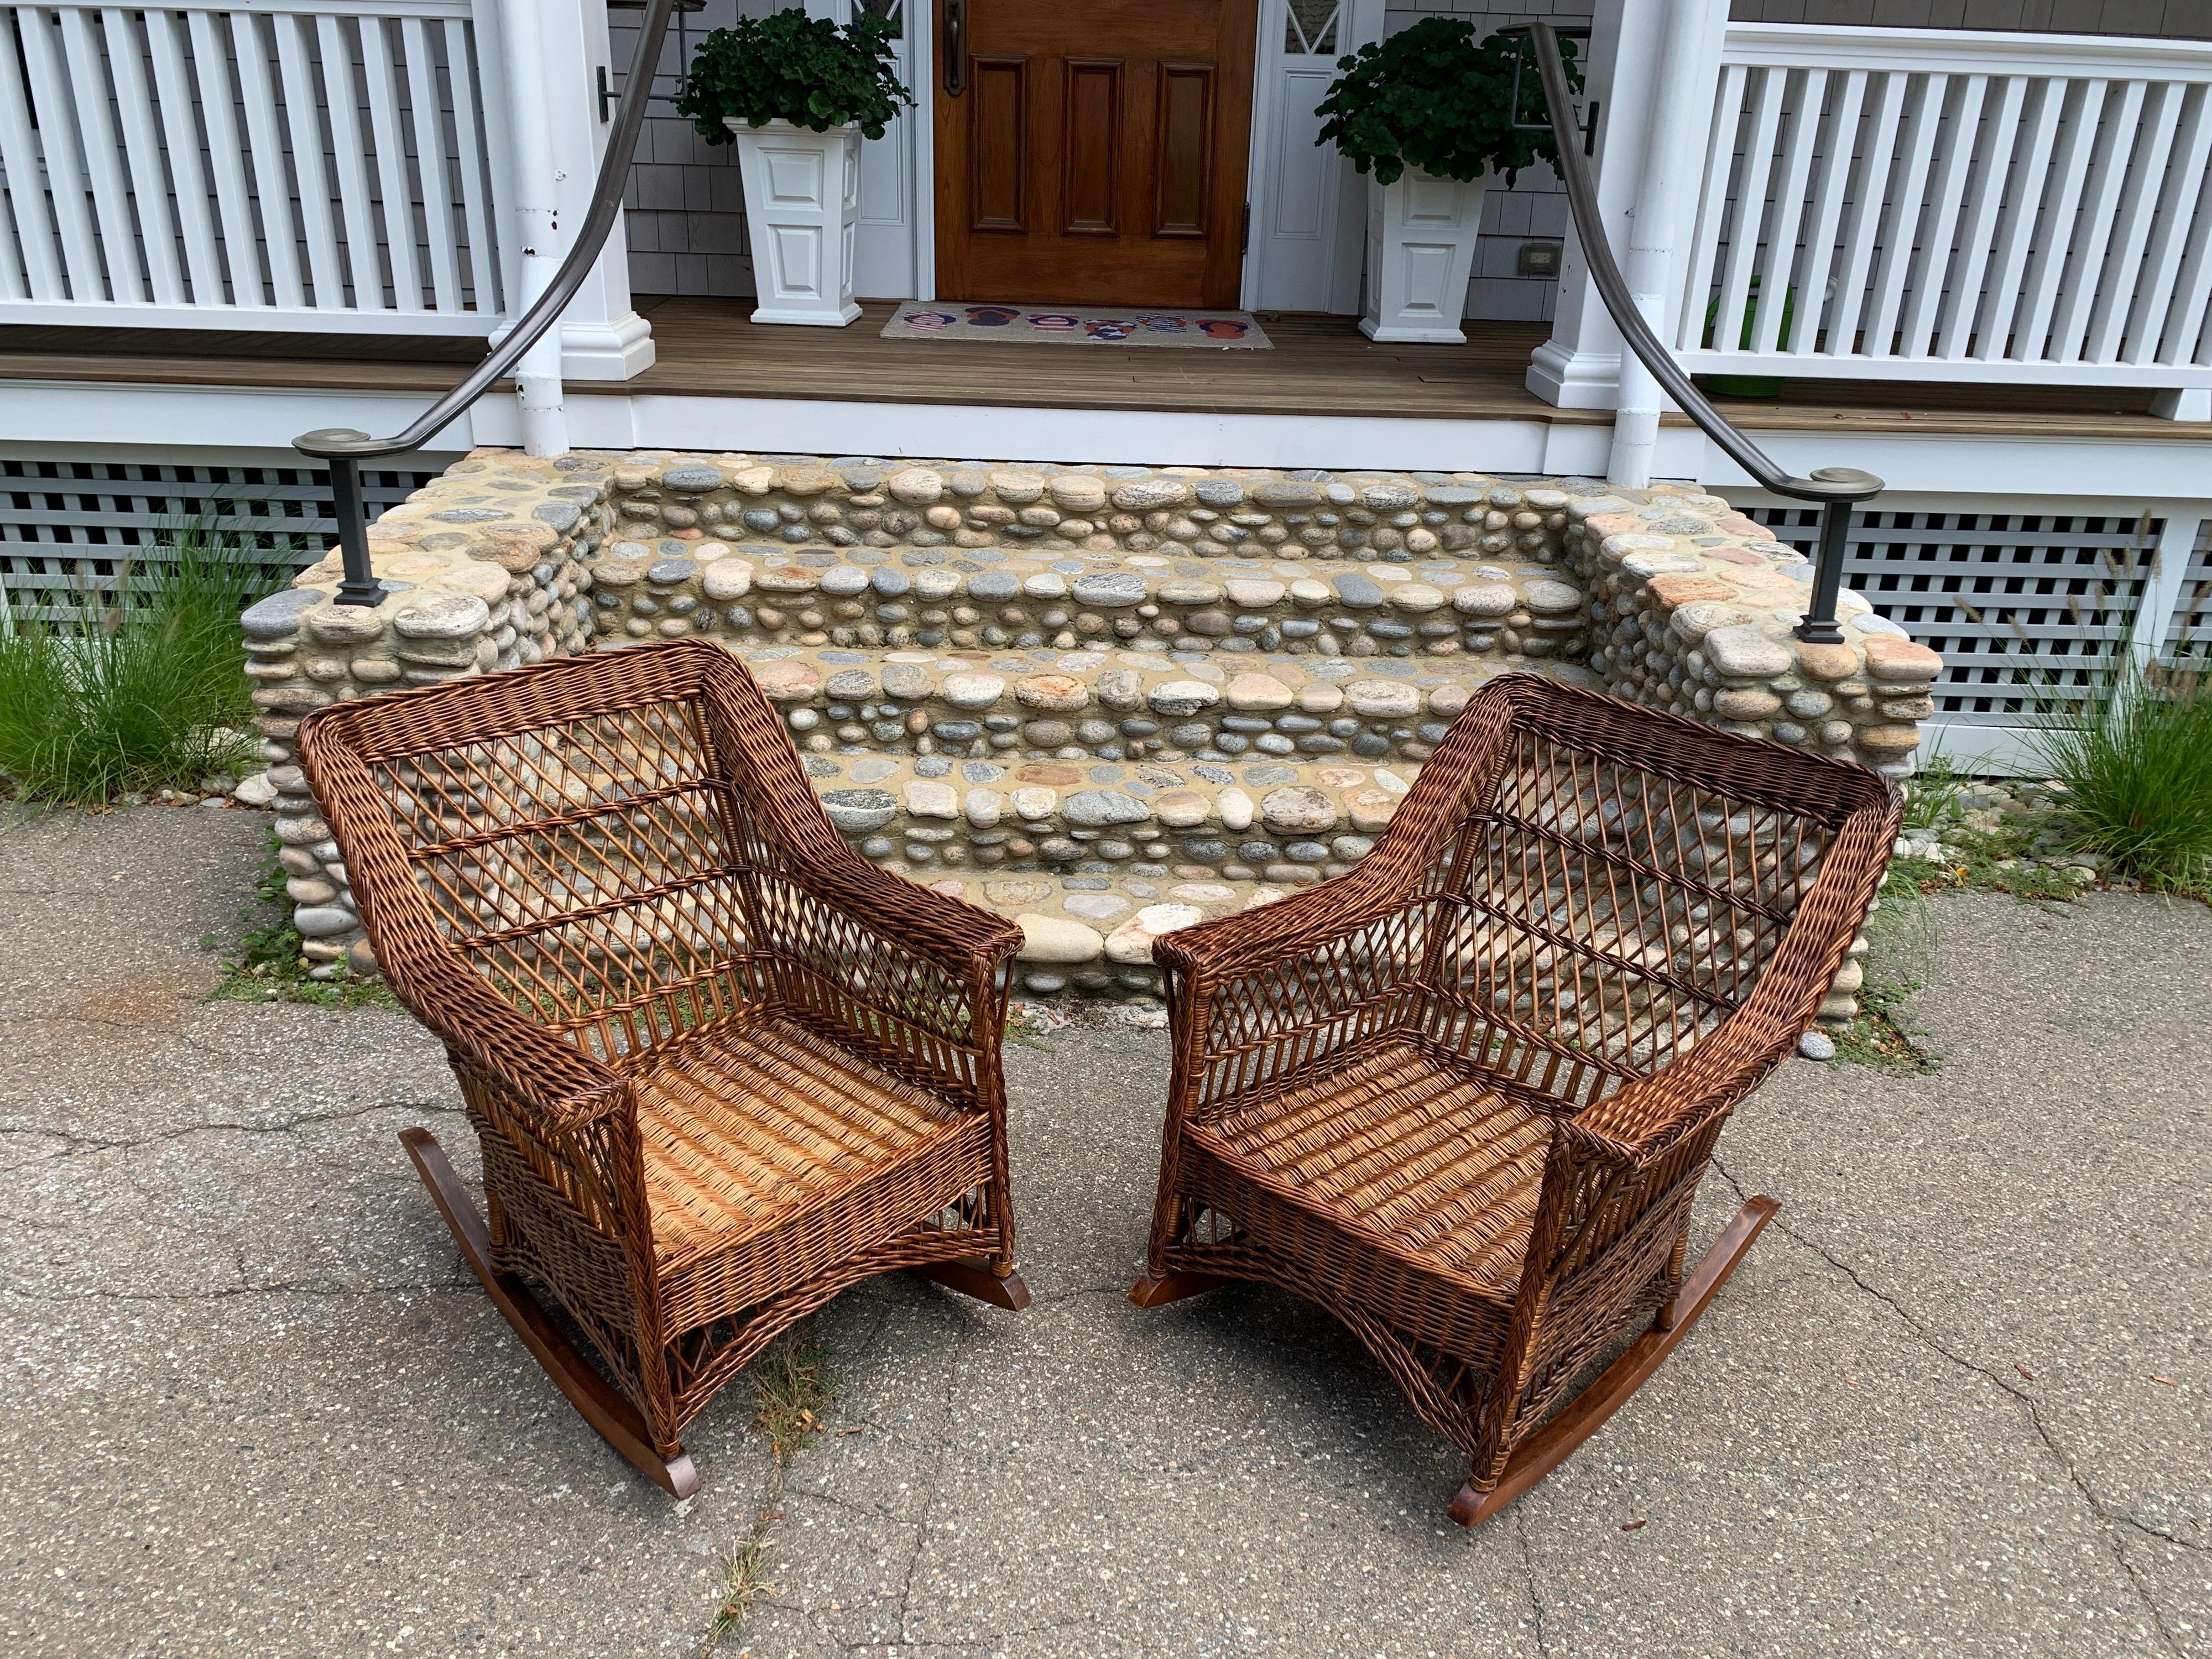 A beautiful pair of antique wicker rockers woven of willow in a natural stained finish. Chairs measure 28” wide, 36” deep, 33” tall with a seat platform height of 14” without a cushion.